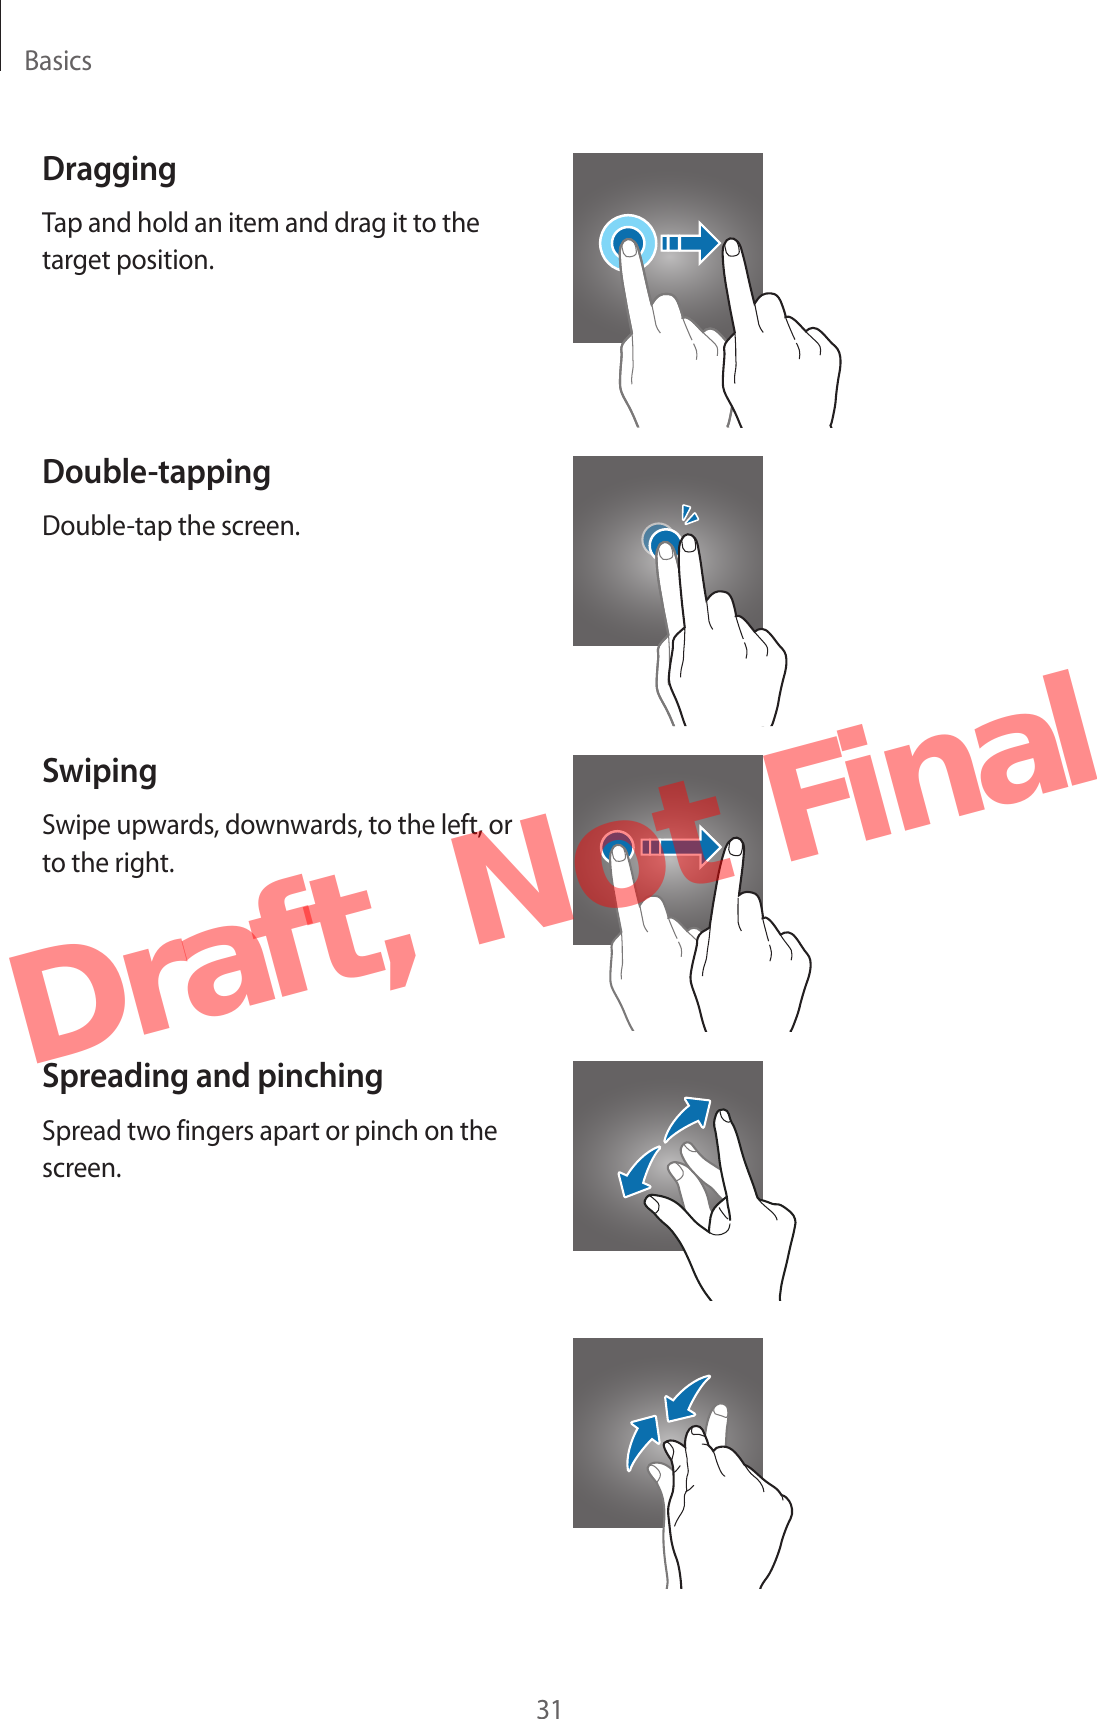 Basics31DraggingTap and hold an item and drag it to the target position.Double-tappingDouble-tap the screen.SwipingSwipe upwards, downwards, to the left, or to the right.Spreading and pinchingSpread two fingers apart or pinch on the screen.Draft,  Not  Final